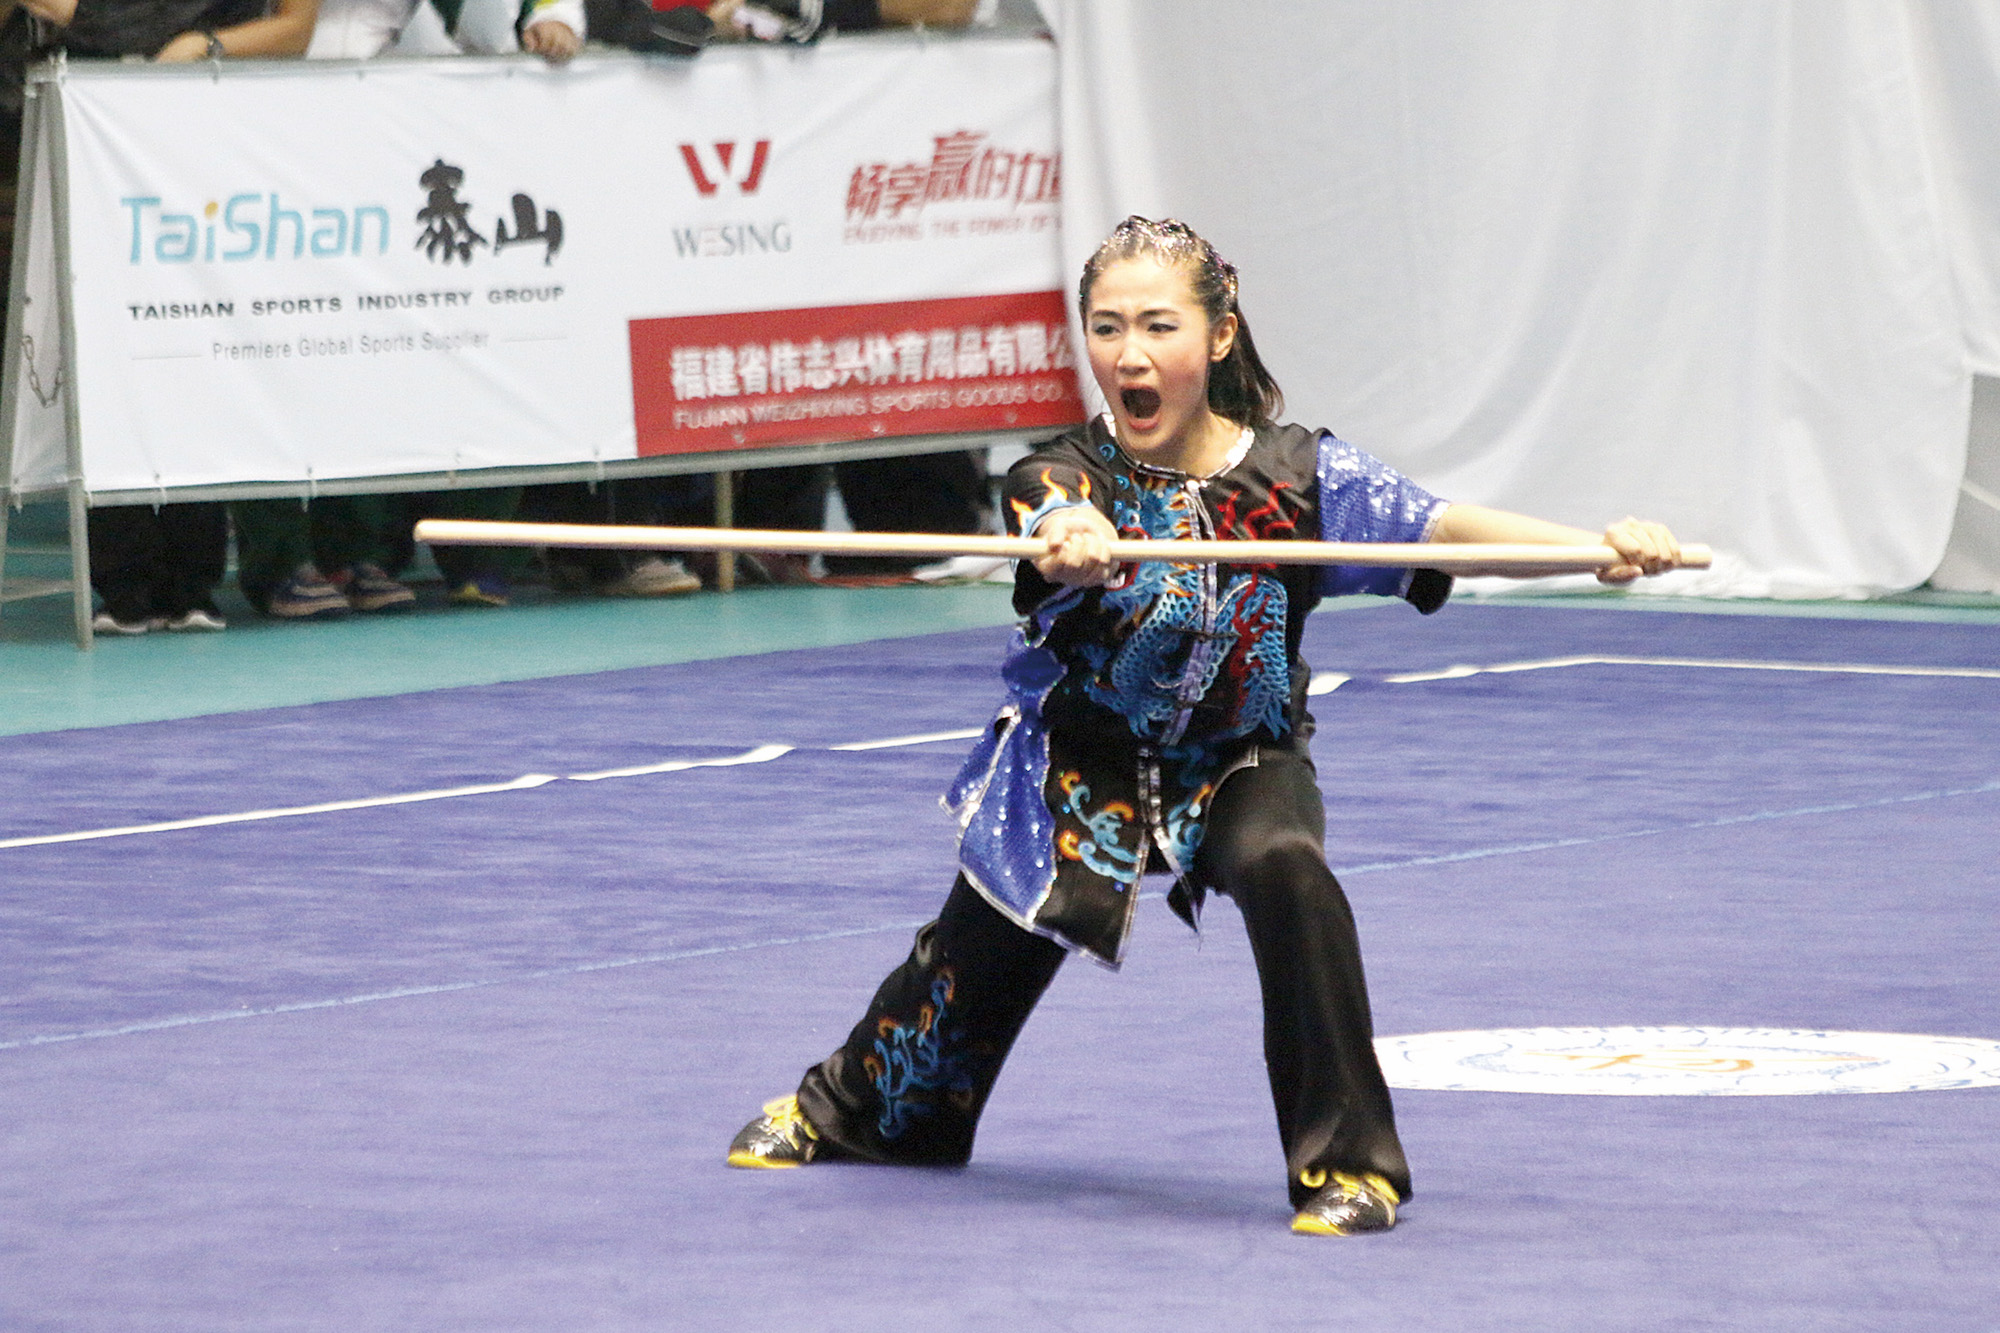 Angela Wong claimed her first international gold medal in 2016 at the 6th World Junior Wushu Championships in Bulgaria